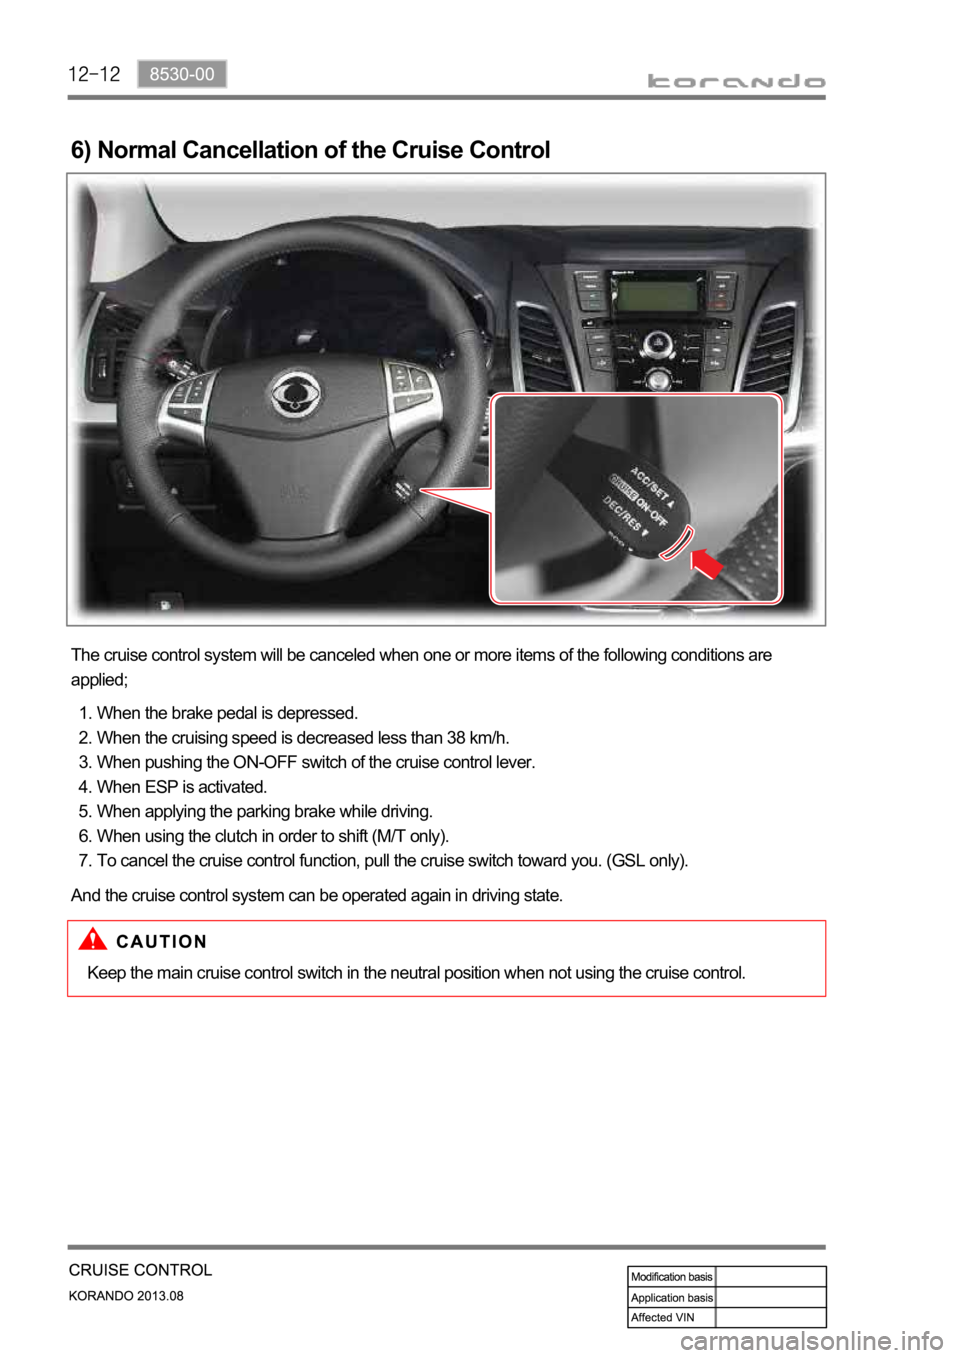 SSANGYONG KORANDO 2013  Service Manual 6) Normal Cancellation of the Cruise Control
The cruise control system will be canceled when one or more items of the following conditions are 
applied;
When the brake pedal is depressed.
When the cru